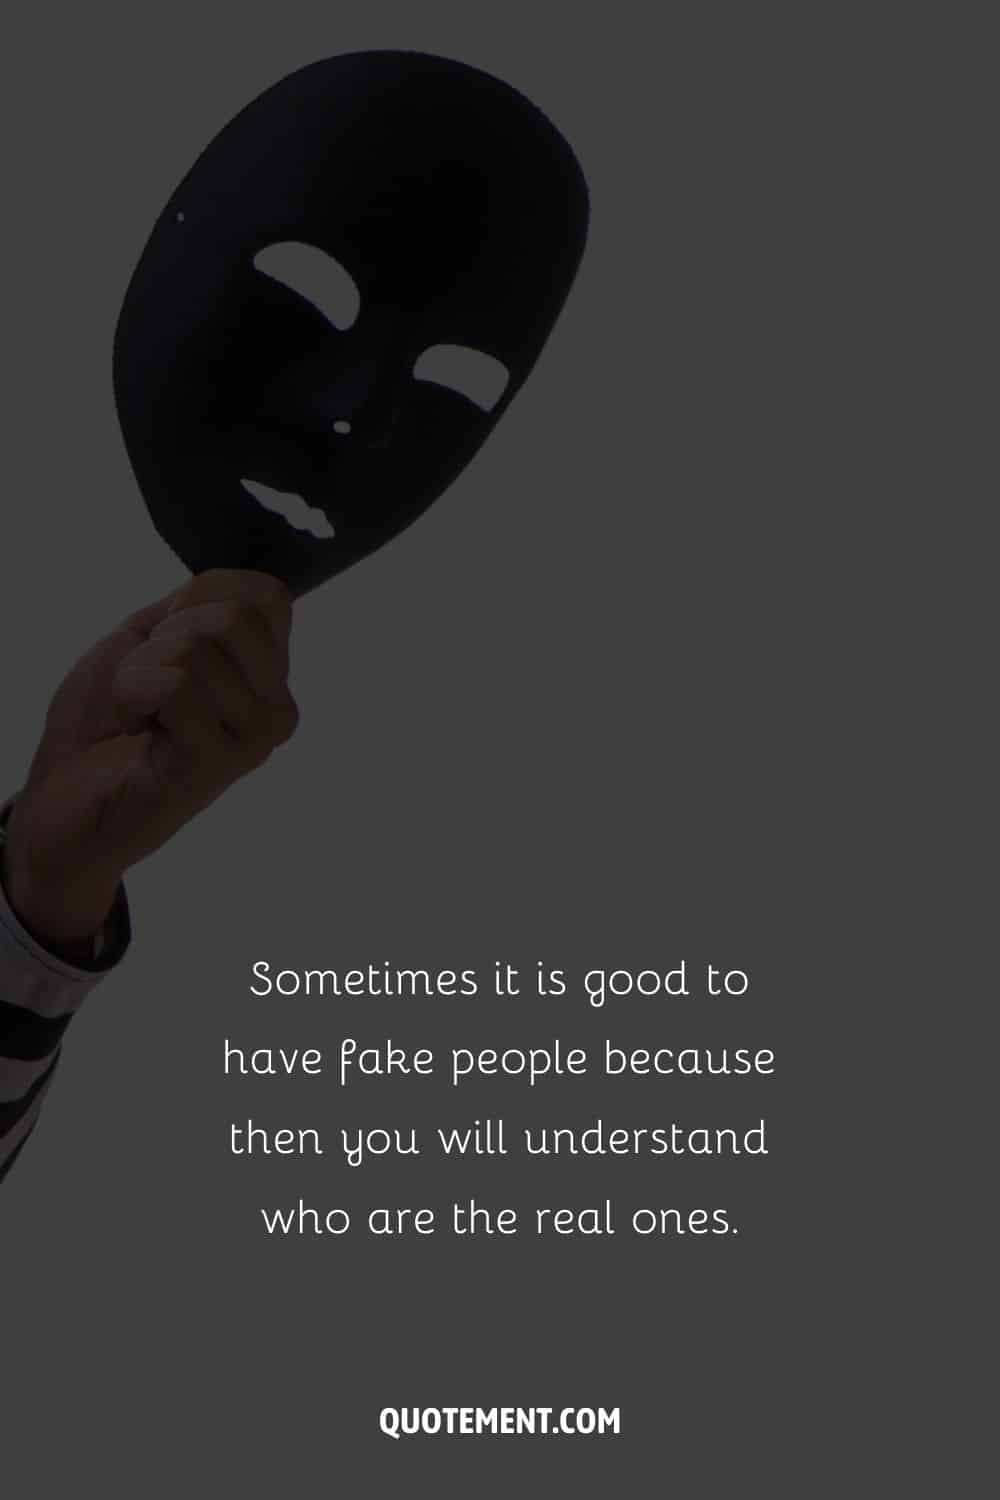 Sometimes it is good to have fake people because then you will understand who are the real ones.